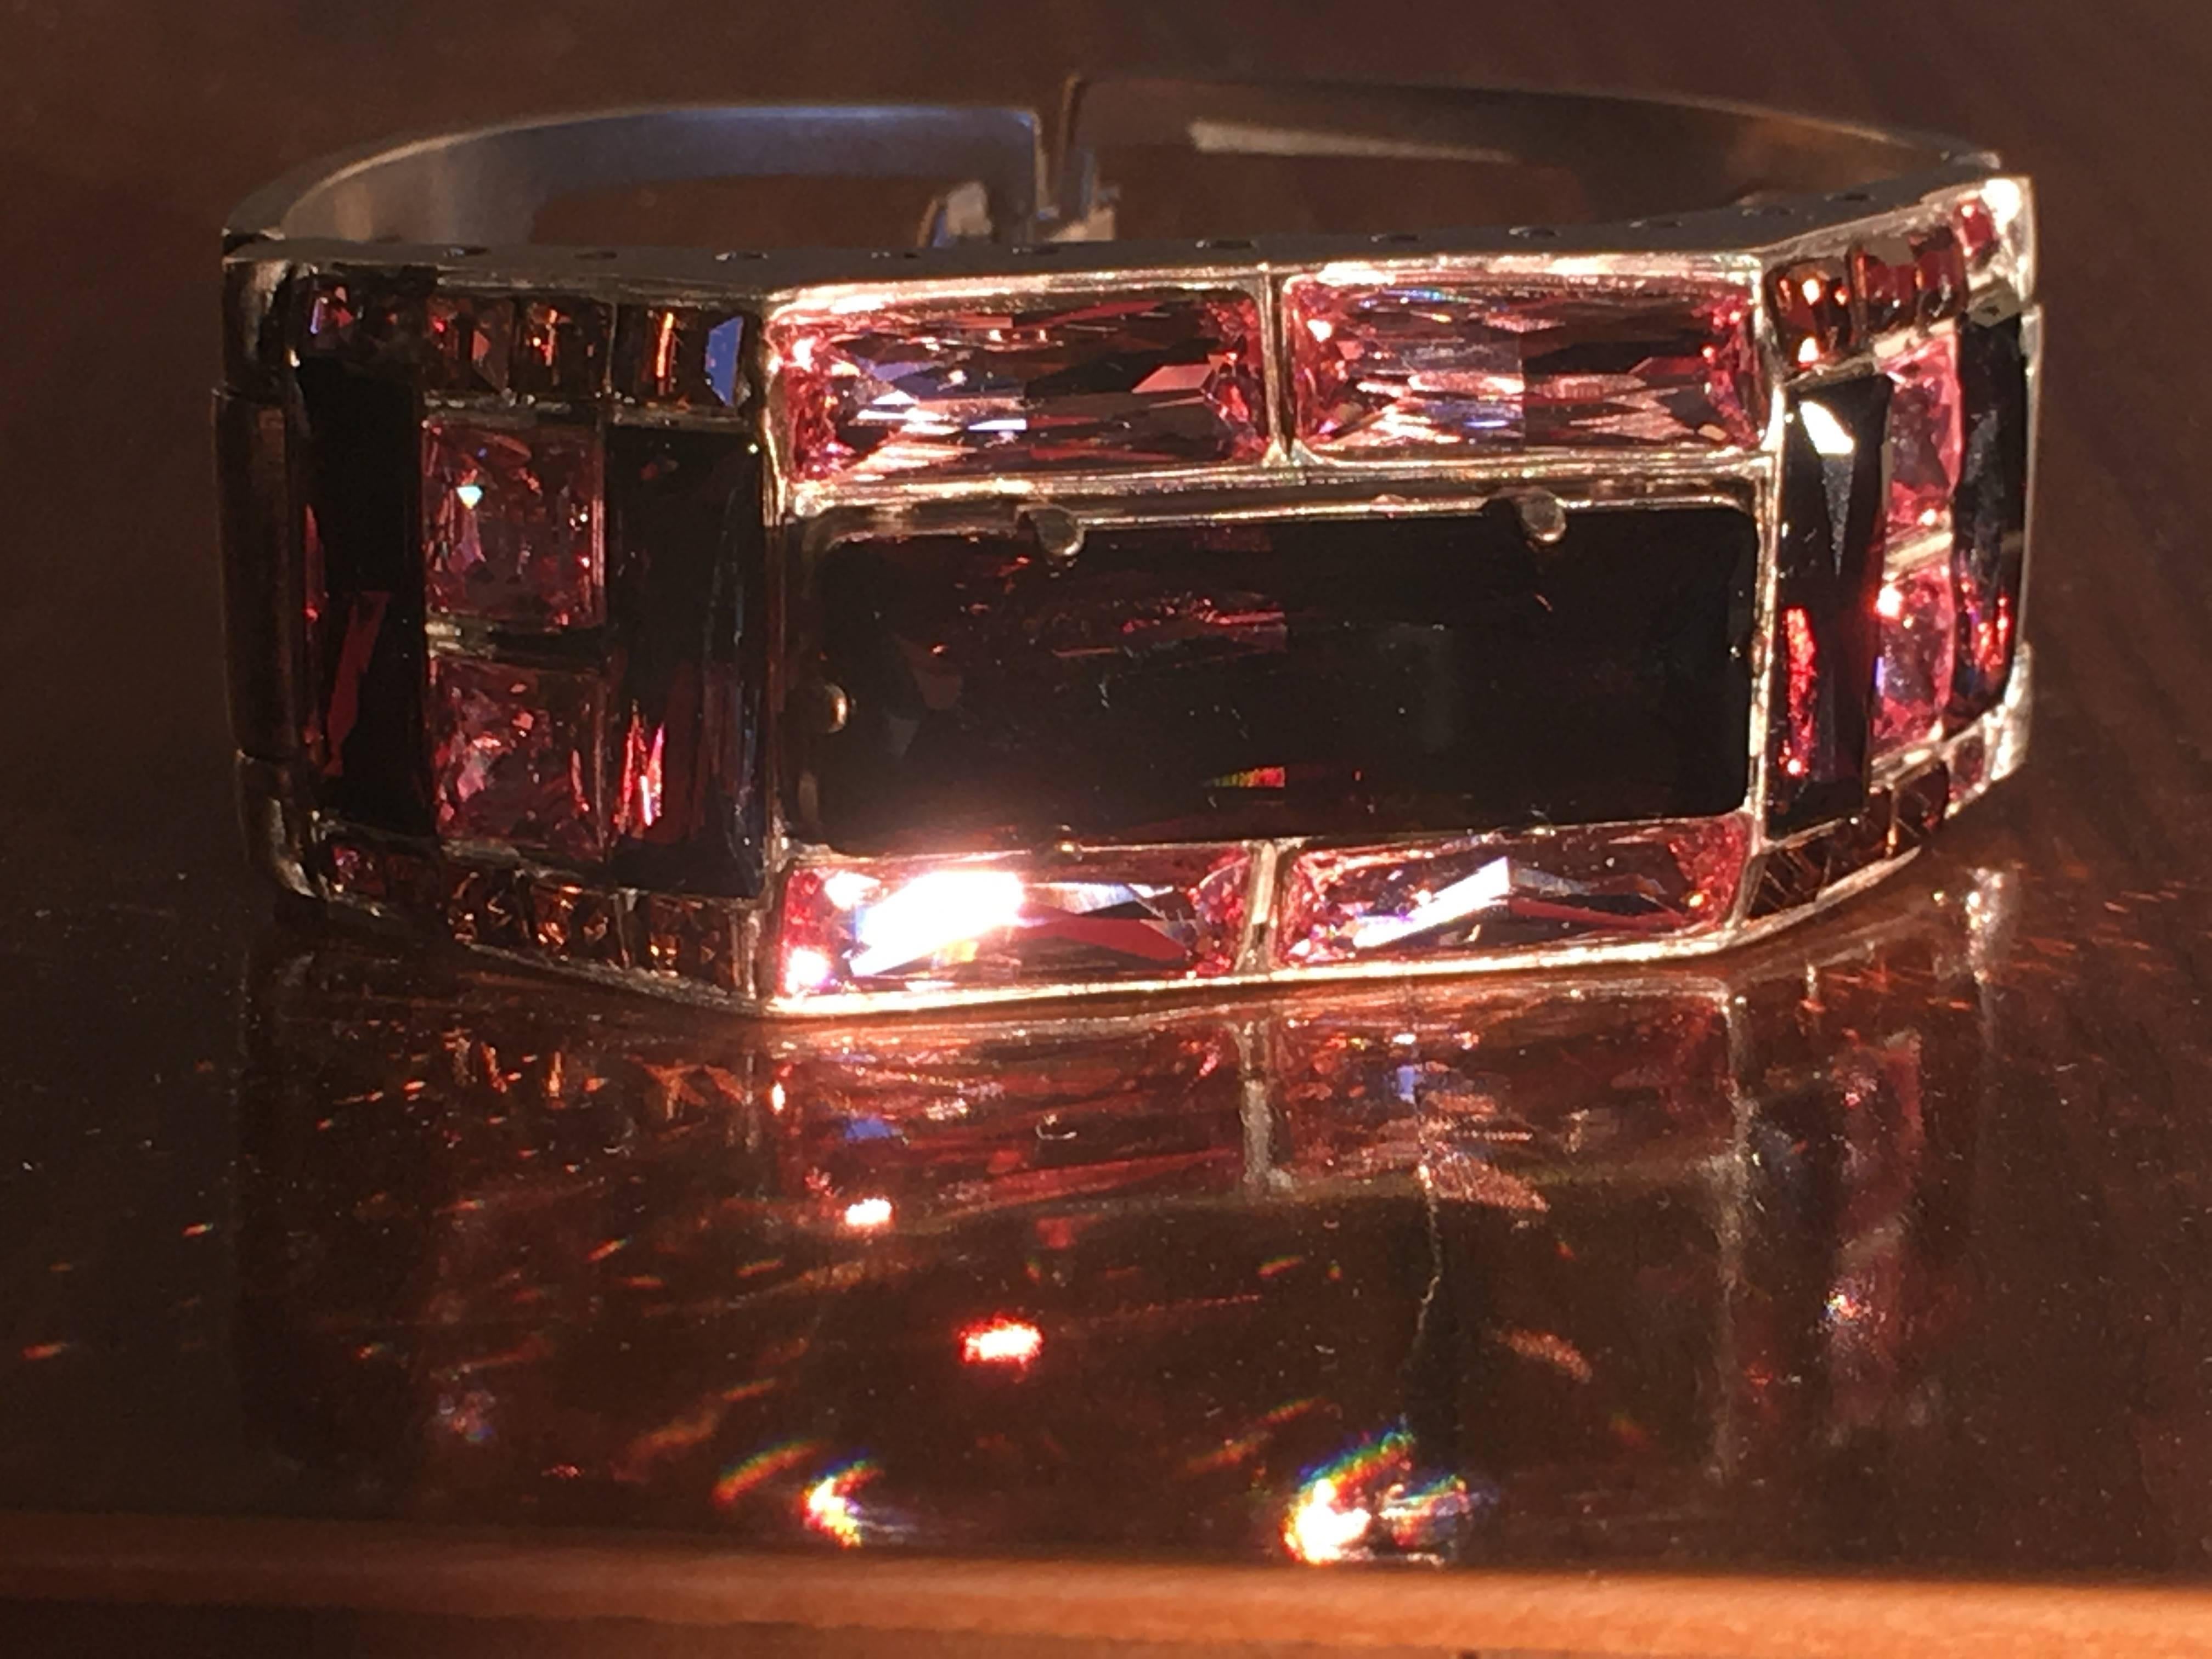 Jean Paul Gaultier Crystal Cuff Bracelet.
Beautiful shades of pink and rose, accented with topaz, set in matte silver tone metal.